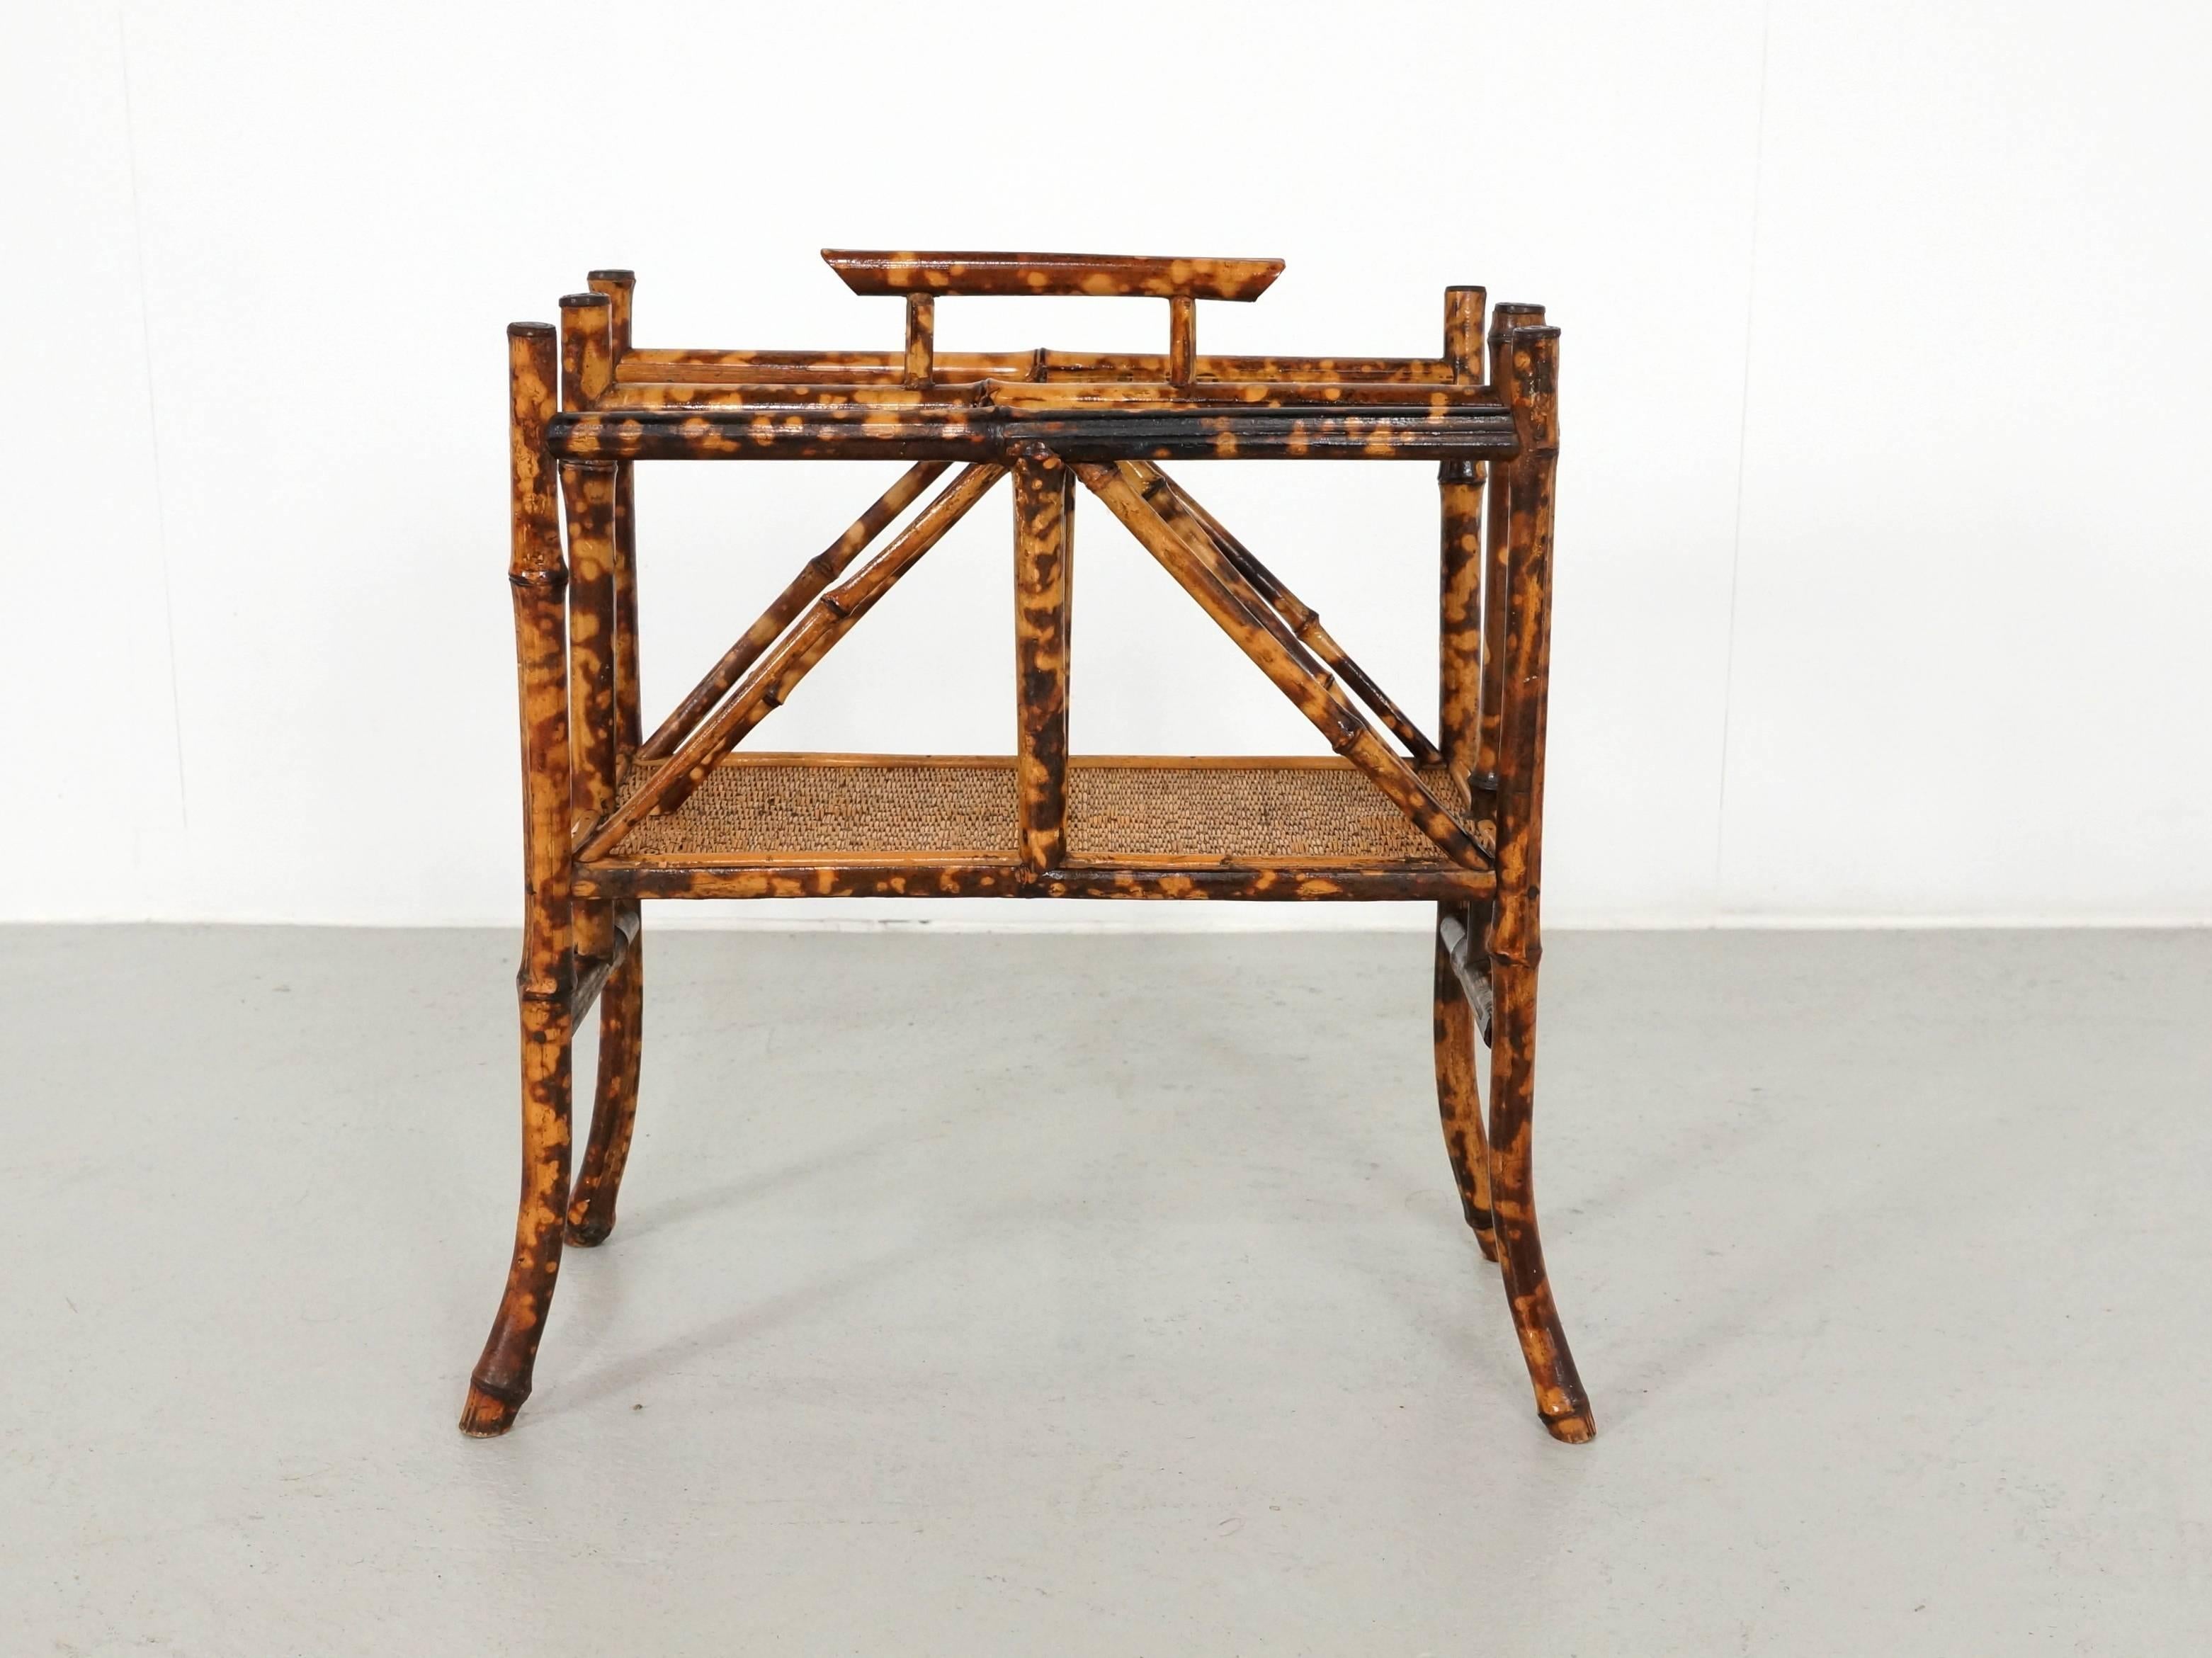 English tortoise pattern bamboo magazine rack dating from the end of the 19th century. In very Good condition with Rattan webbing. These magazine racks are very nice for Art Deco furnishing.